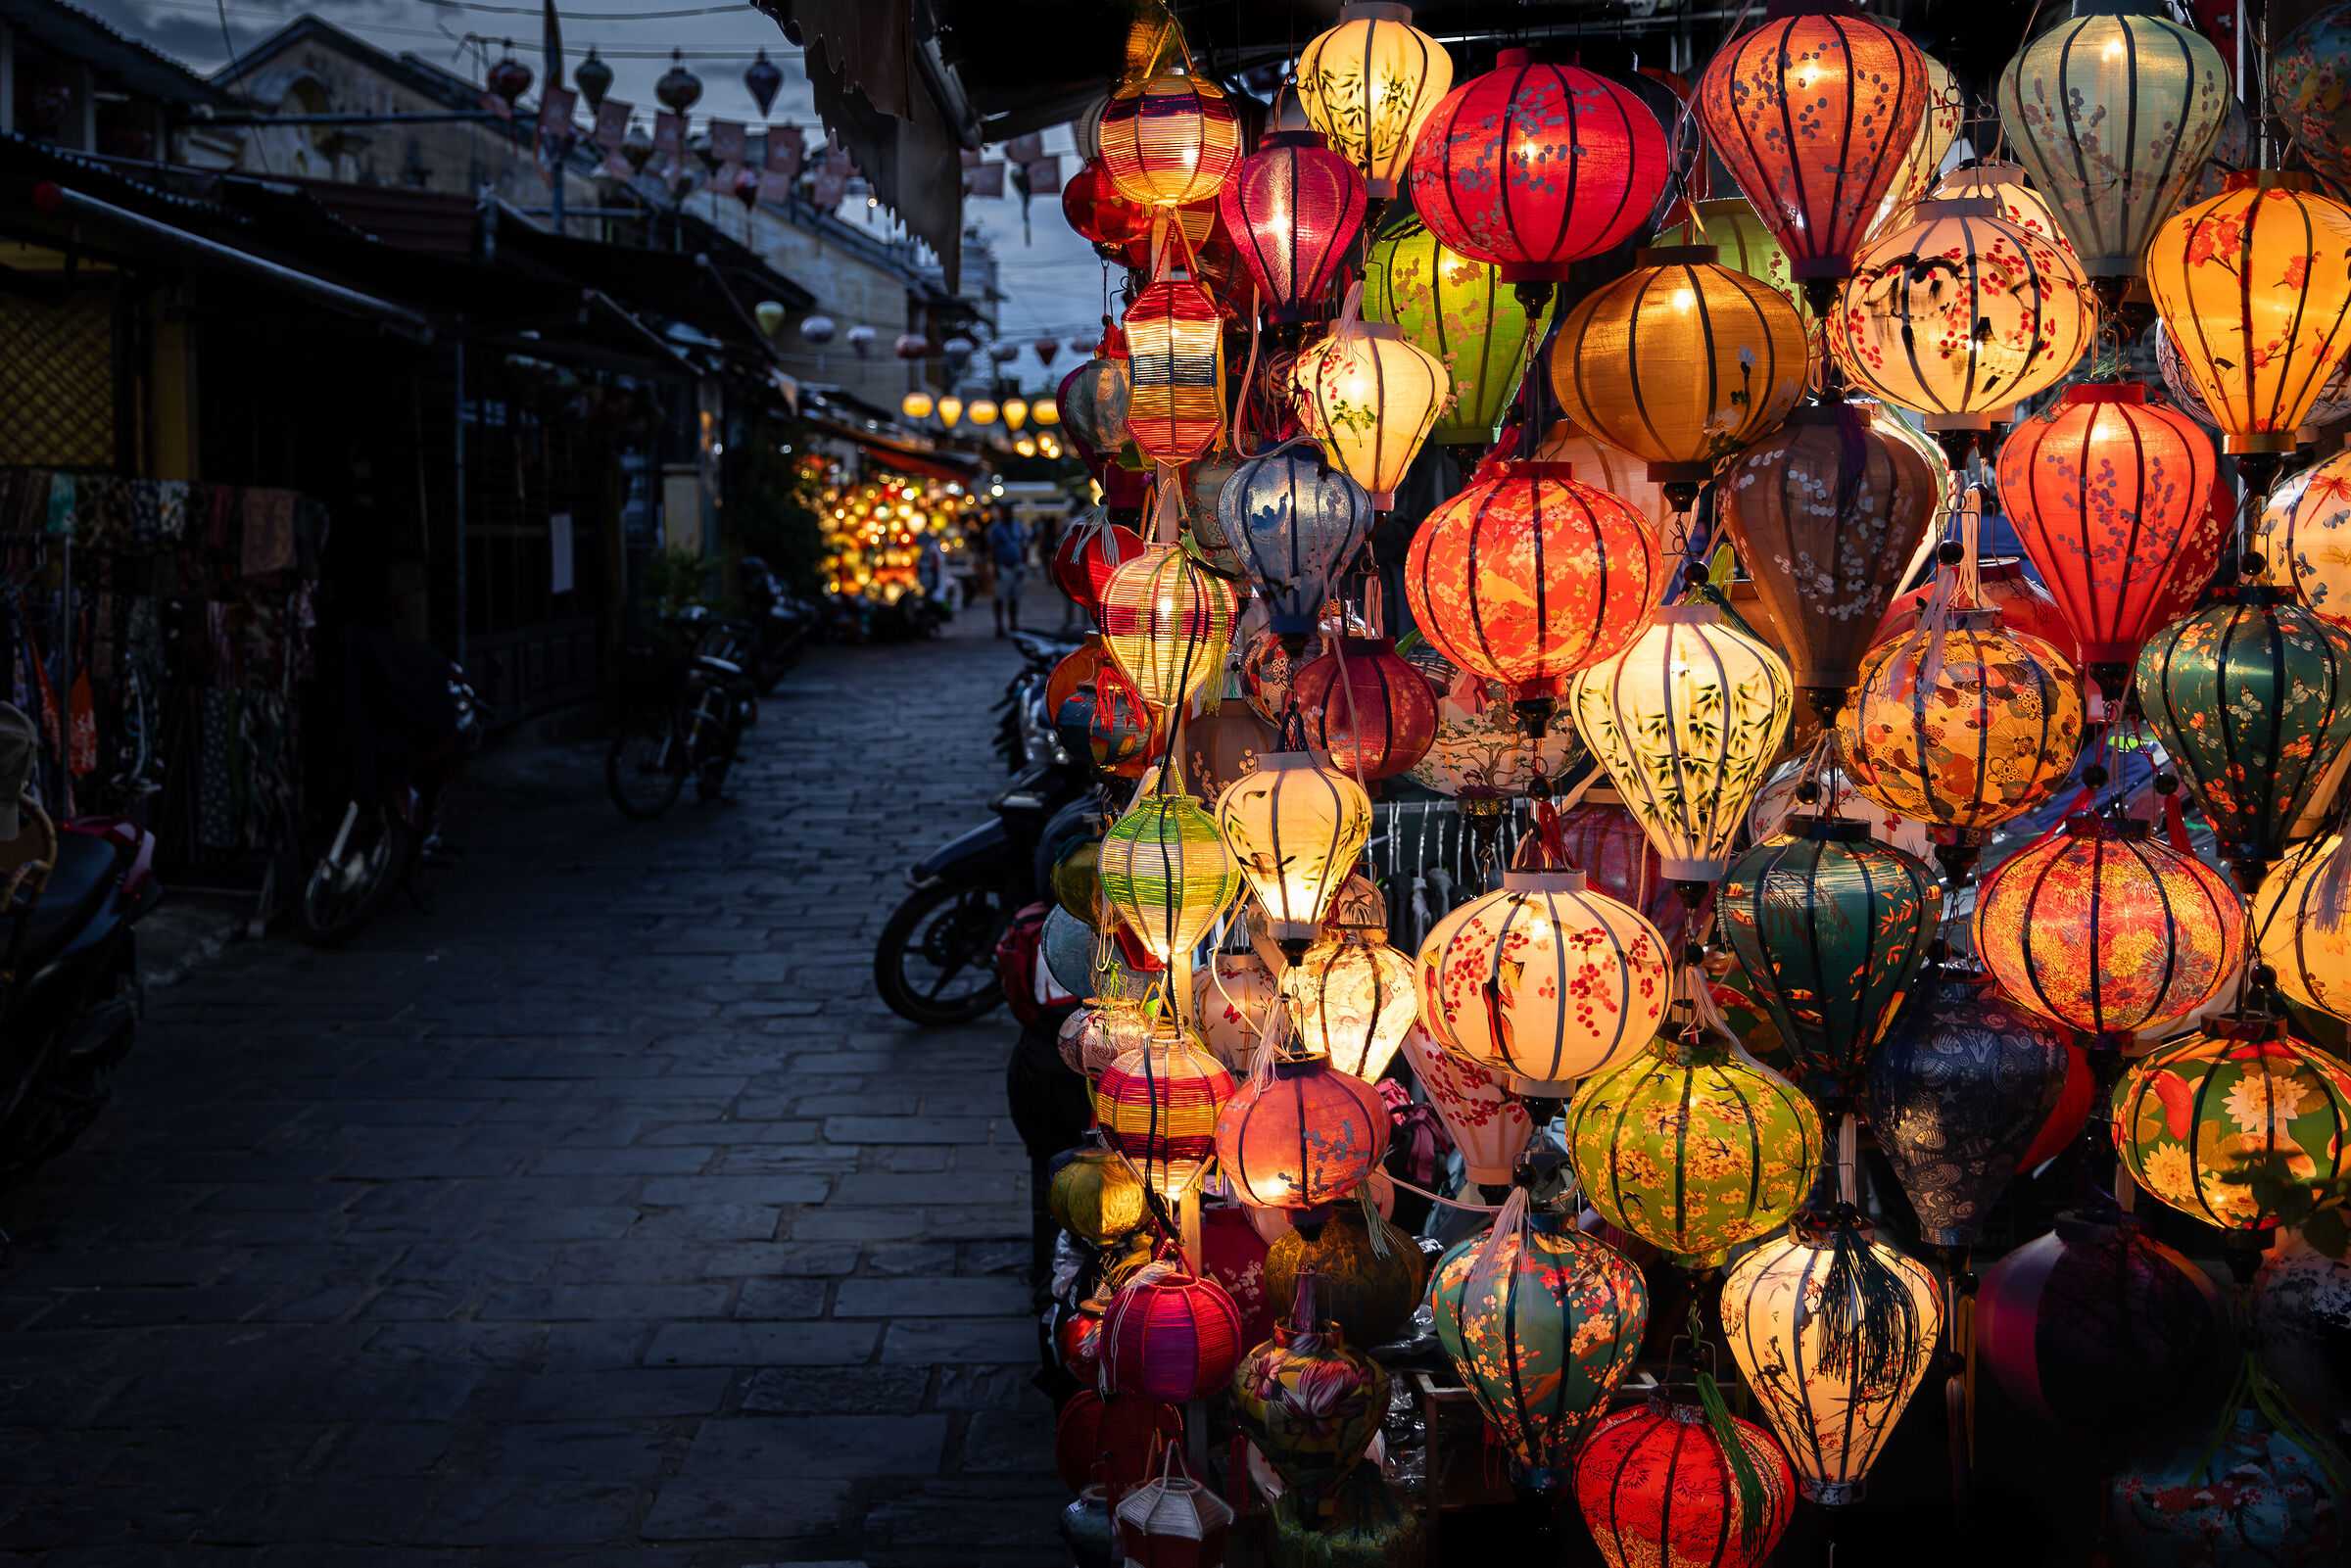 Lantern shops on the streets of Hoi an...